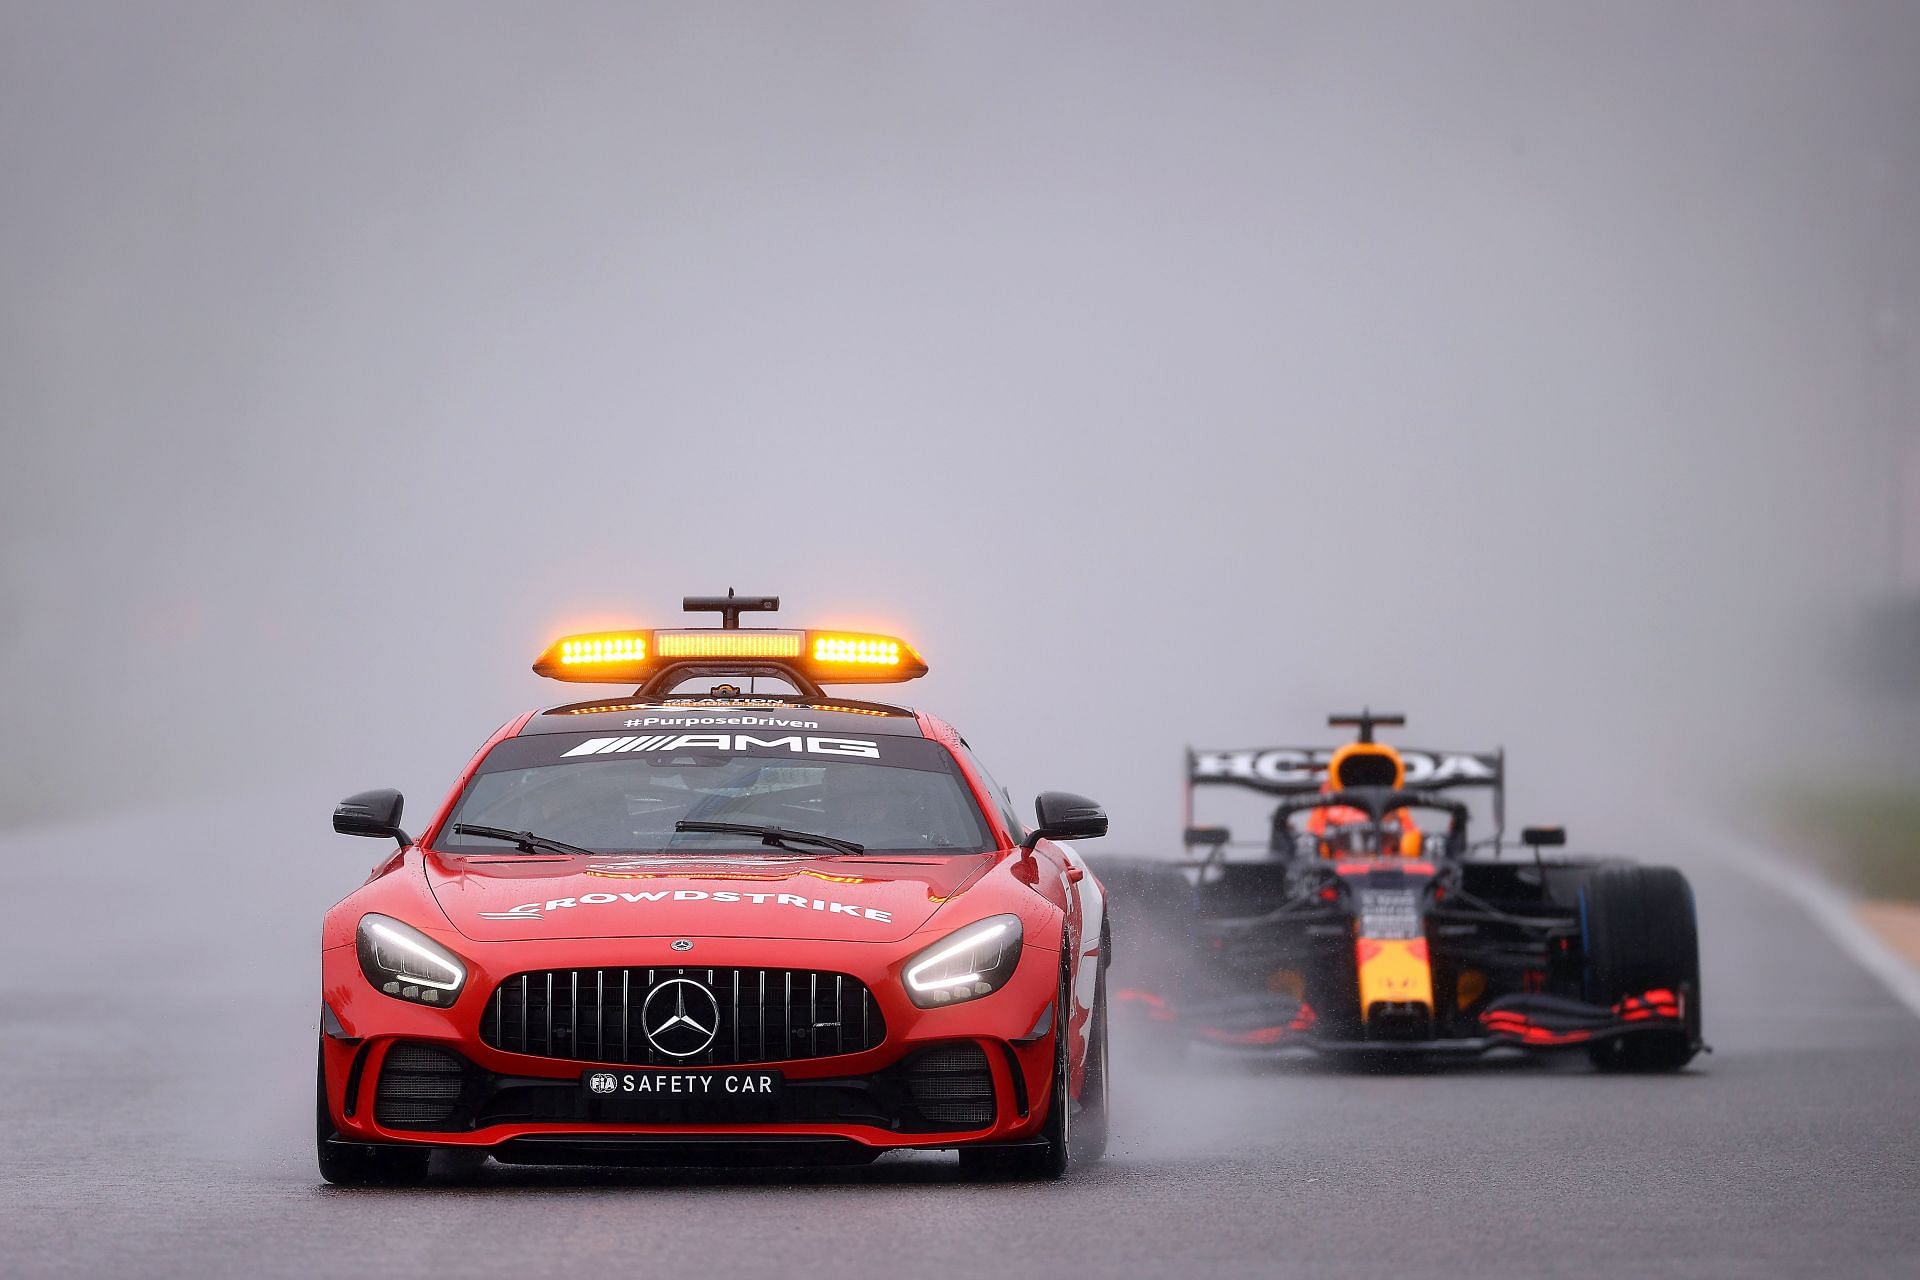 The Mercedes Safety car at the 2021 F1 Grand Prix of Belgium